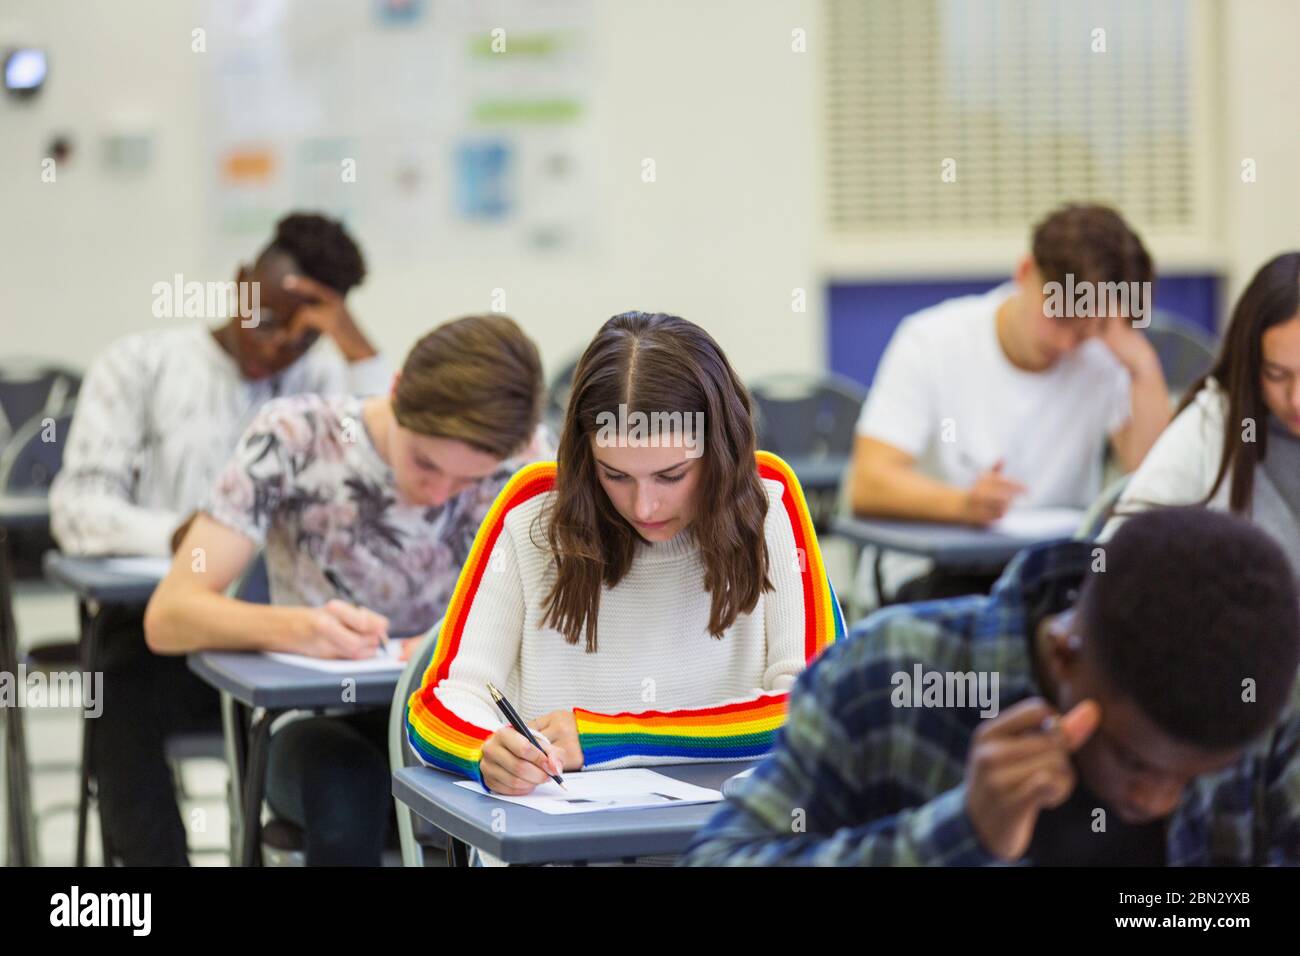 Focused high school girl student taking exam at desk in computer Stock Photo